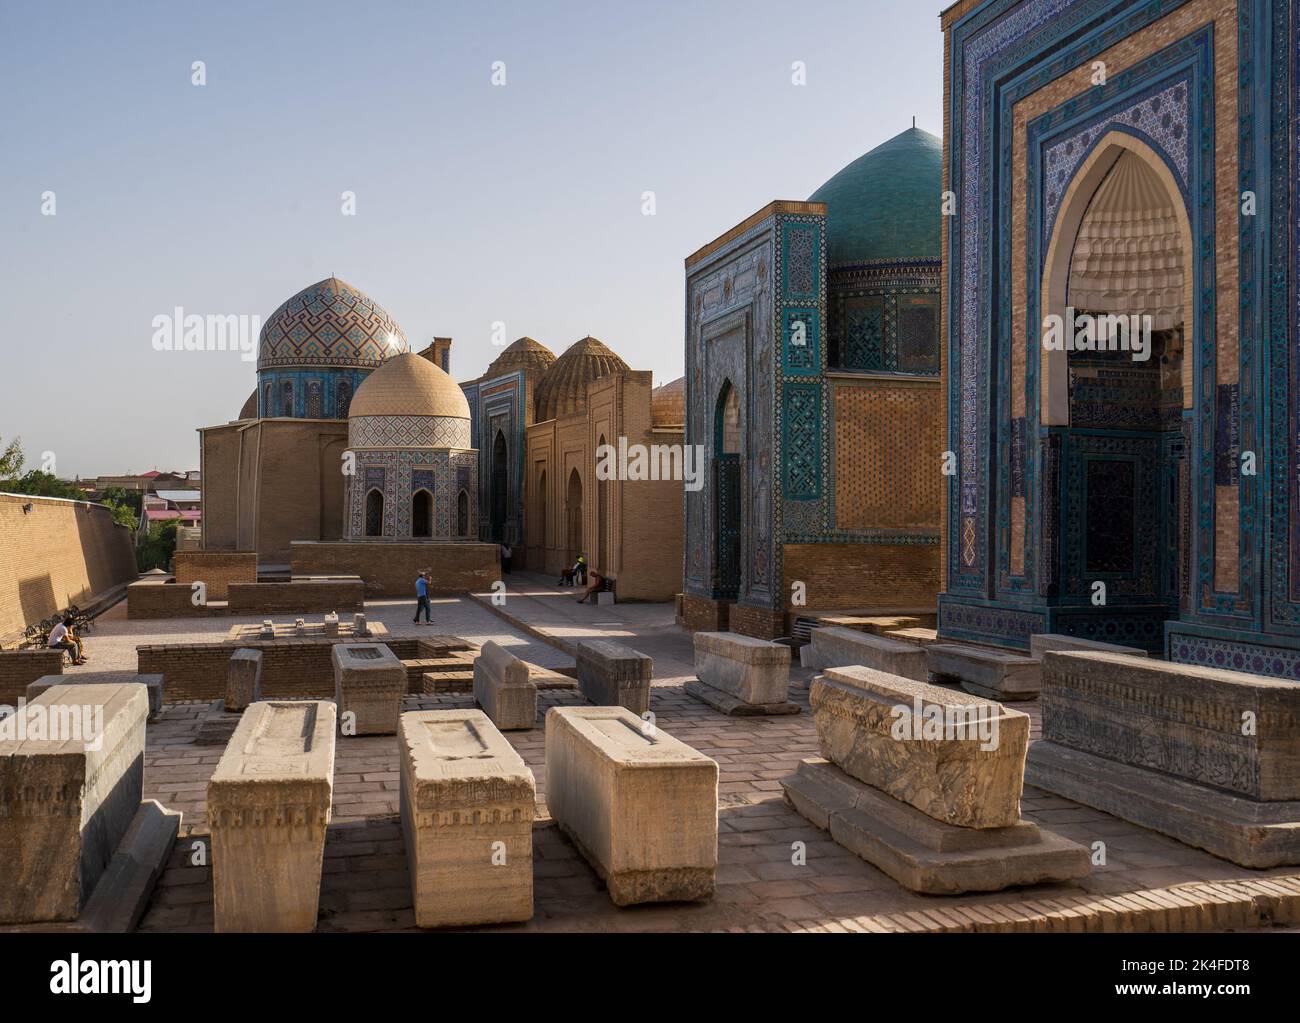 Blue tiled facades and arches of the Shah-i-Zinda mausoleum complex at sunset, Samarkand Stock Photo